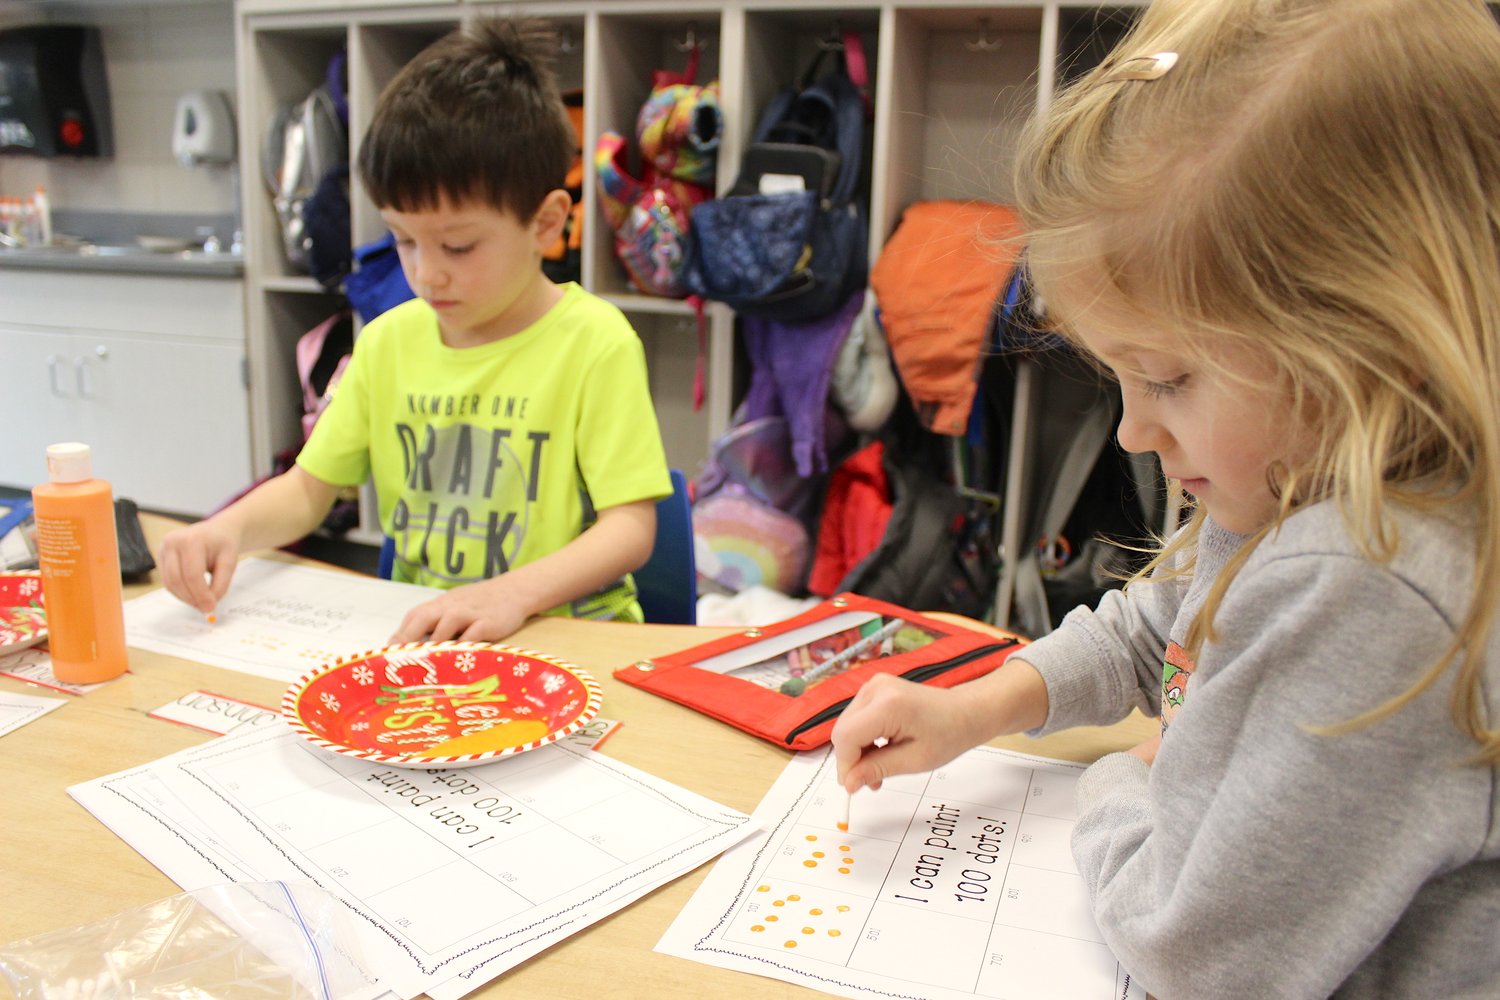 Painting 100 dots, 10 at a time, are Alex Johnson and Caitlin Jeffries during their 100th day of school.